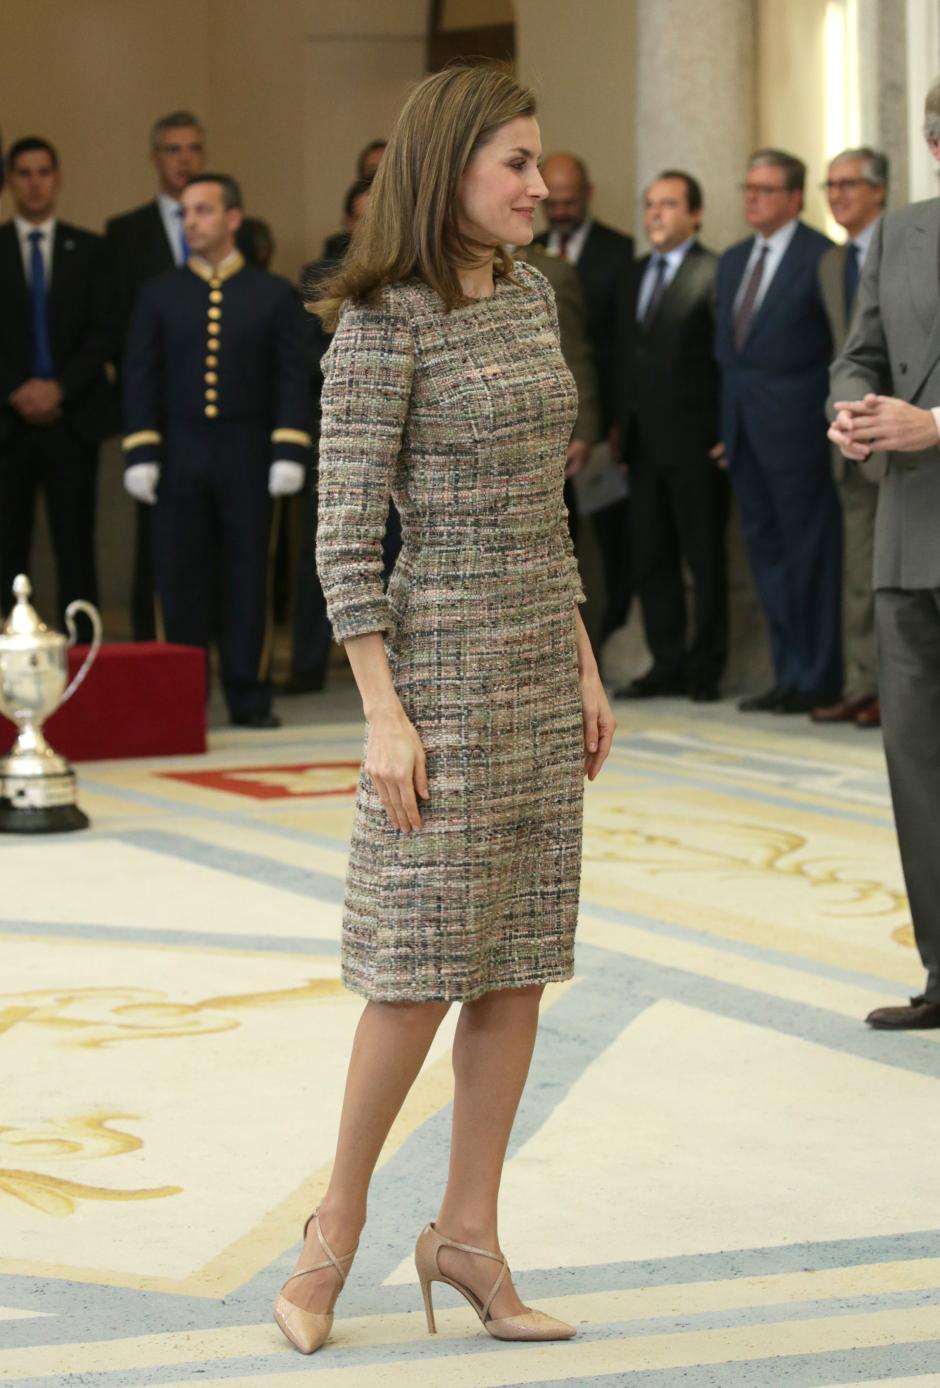 Spanish Queen Letizia Ortiz at the Sports National Awards in Madrid, Spain, on Monday January 23, 2017